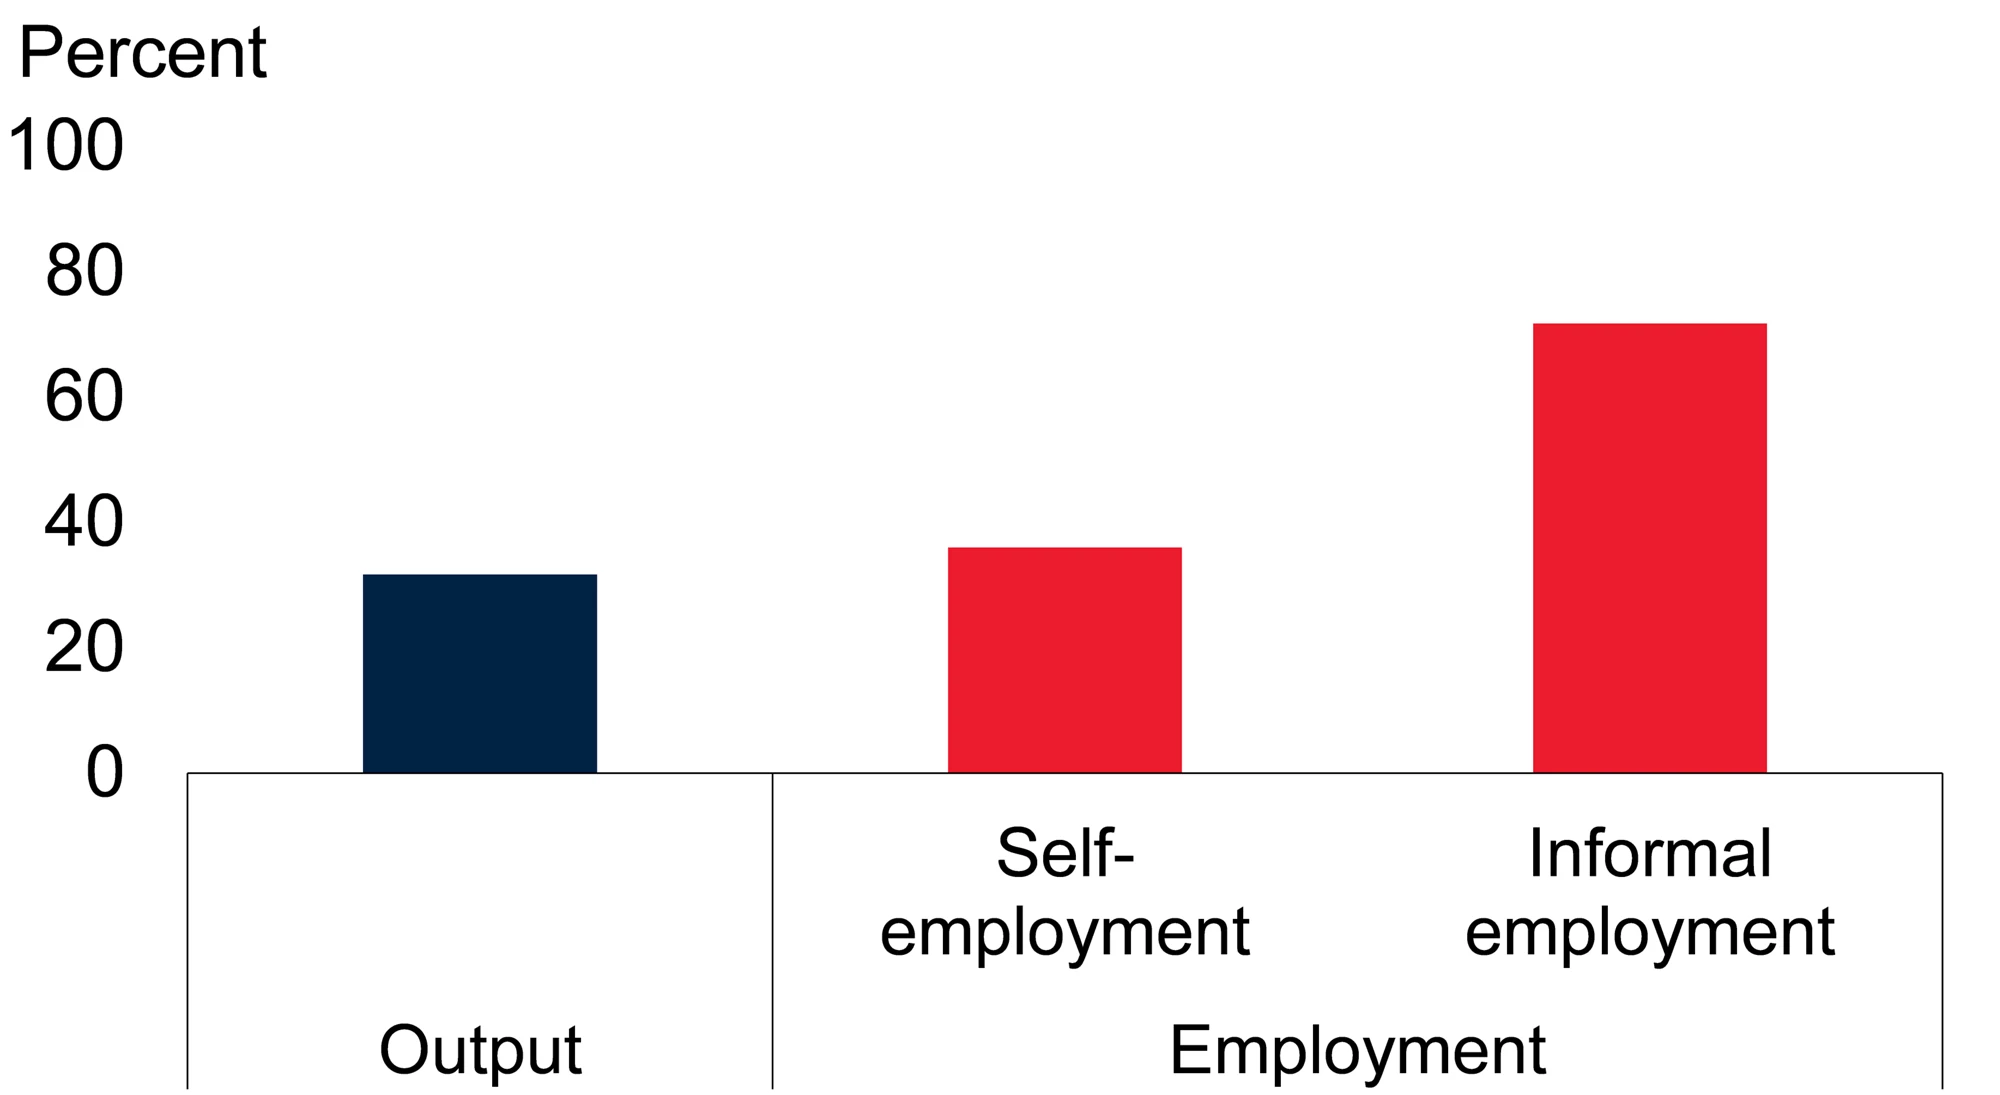 Sources: Elgin et al. (2021); International Labour Organization; World Bank.                  Note: Output informality is estimated using a dynamic general equilibrium model, shown in percent of official GDP. Informal employment and self-employment are shown as percent of total employment. Bars show unweighted average for latest available year.